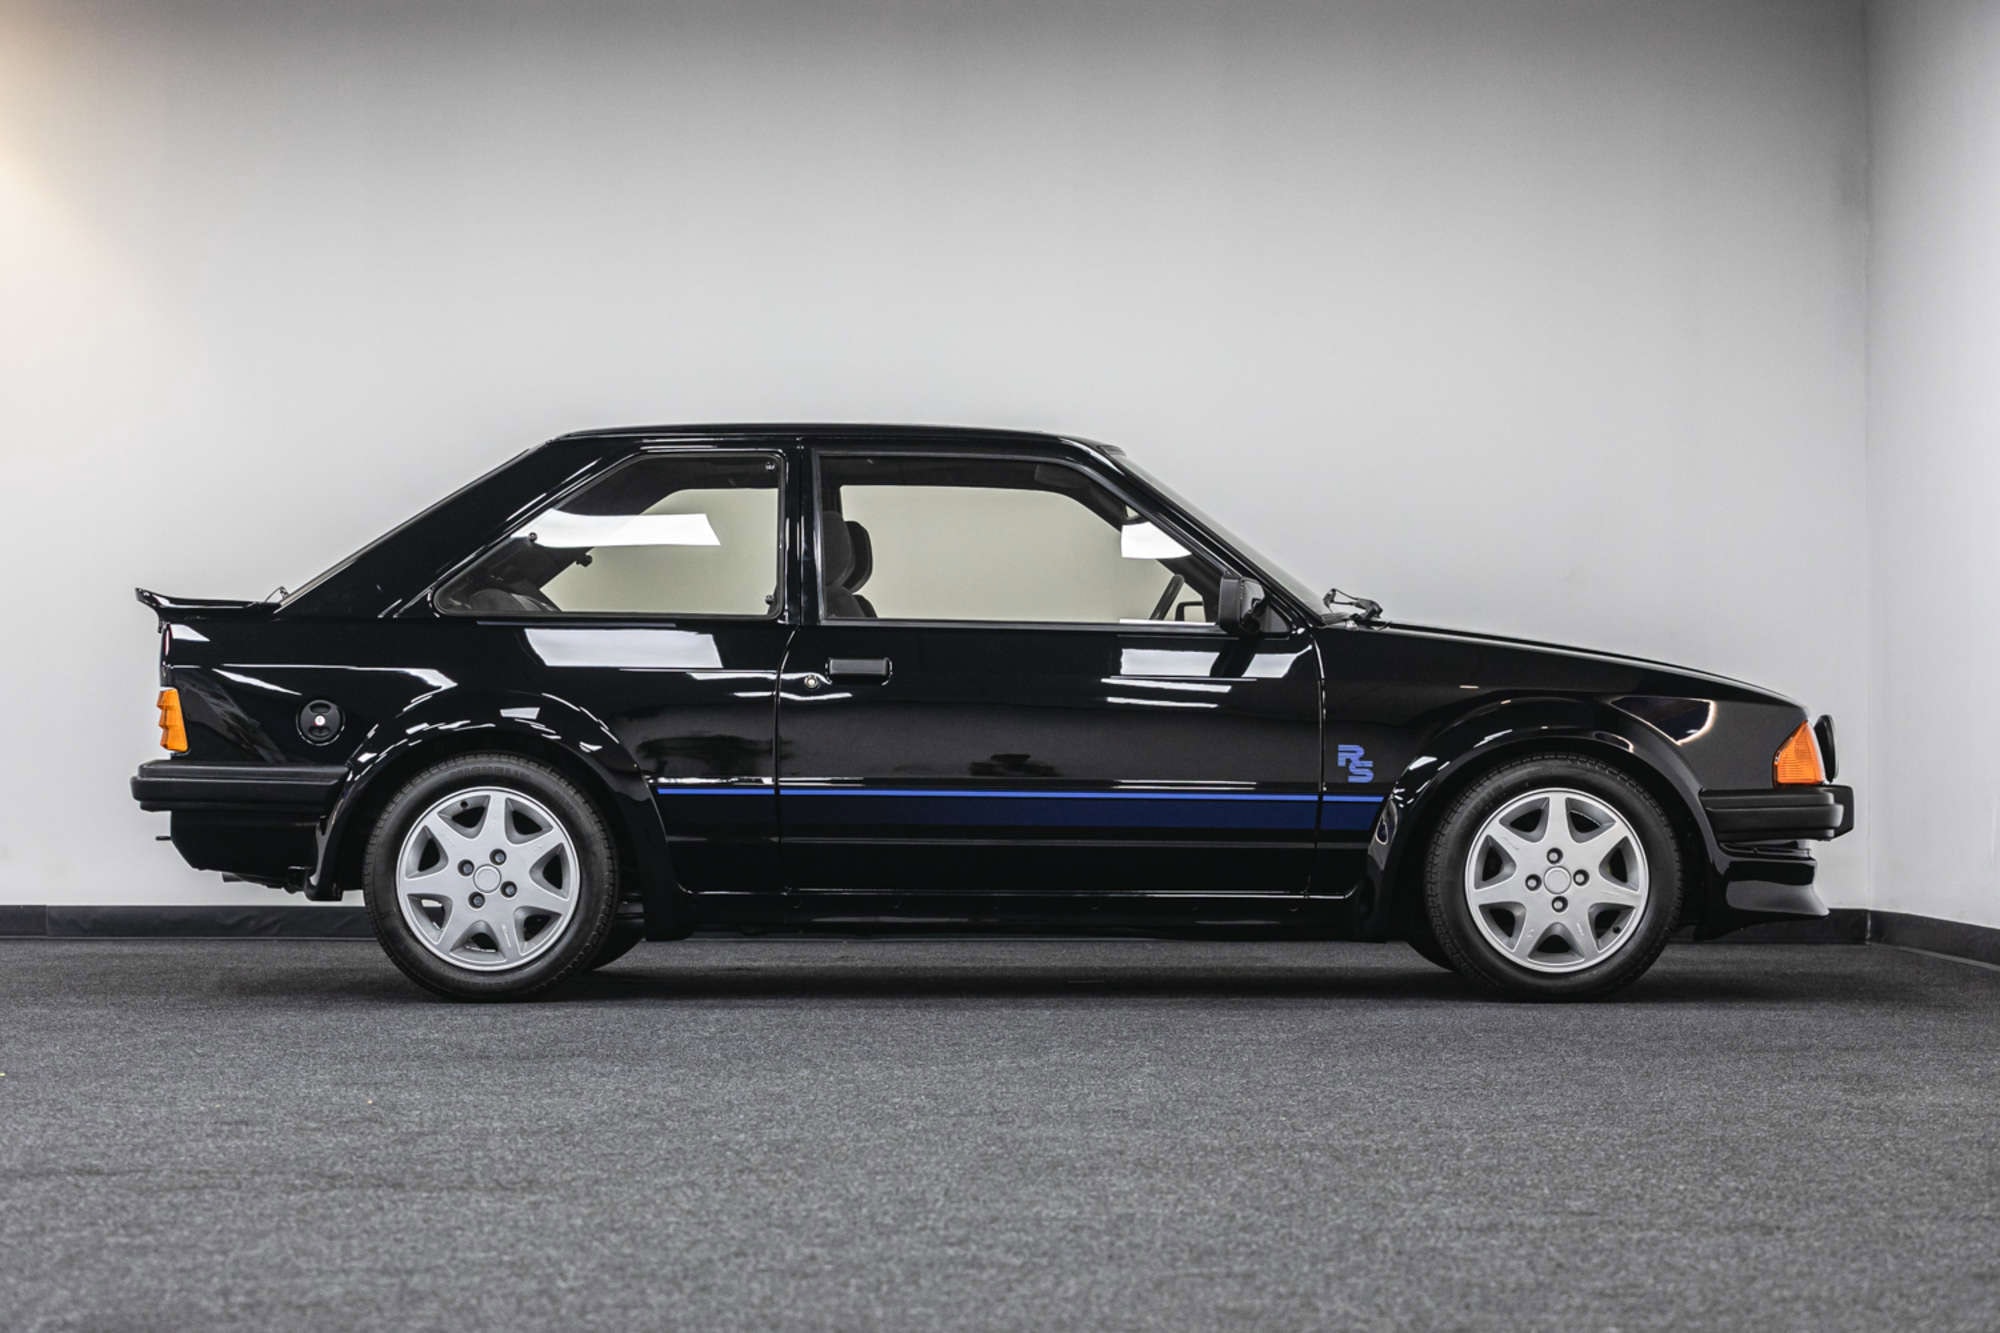 silverstone auctions Diana Princess of Wales 1985 Ford Escort RS Turbo S1 auction Essex royalty UK sports cars  